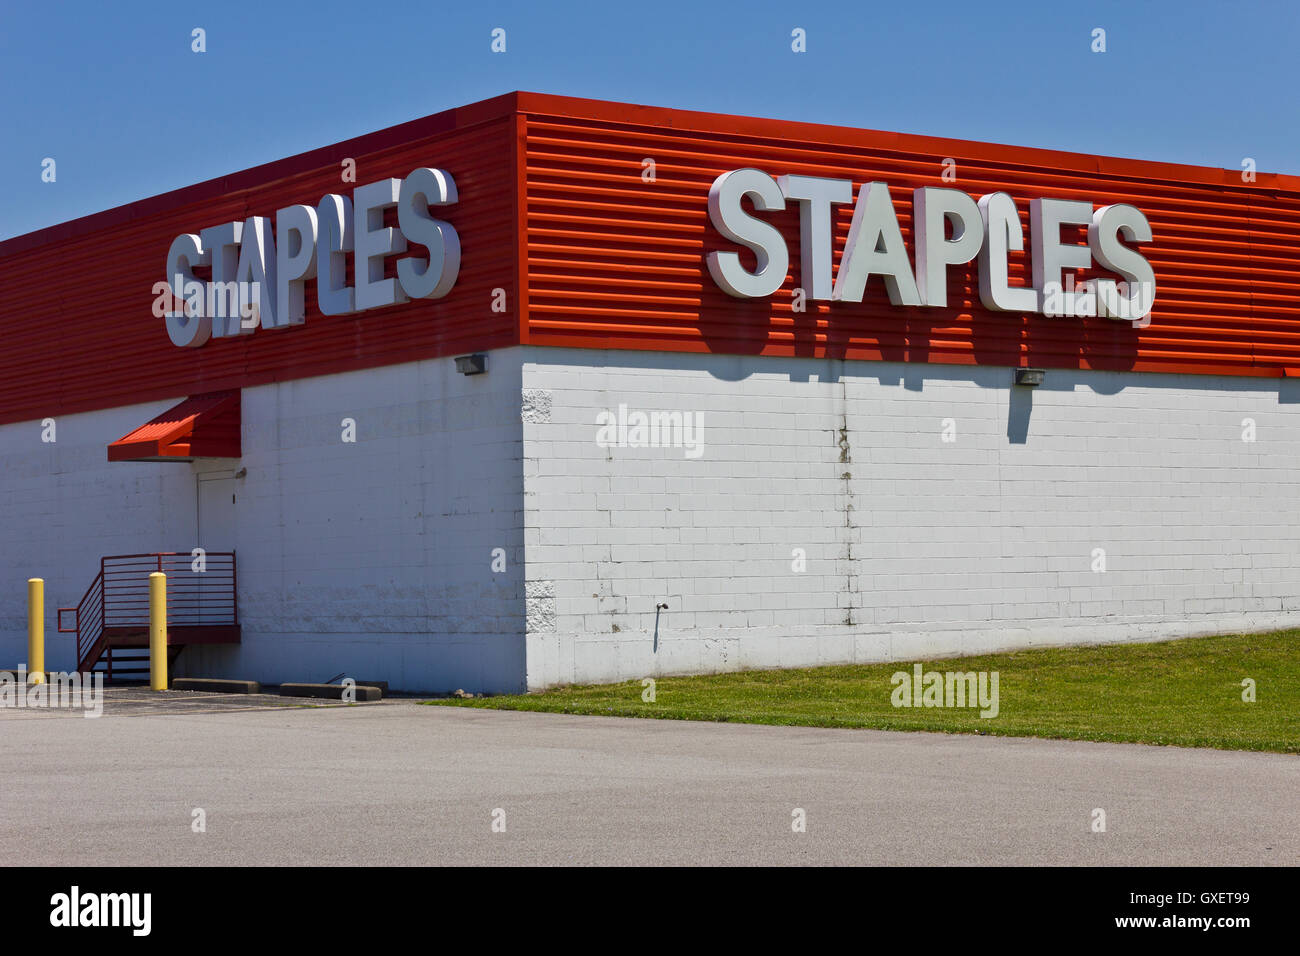 Indianapolis - Circa June 2016: Staples Inc. Retail Location. Staples is a Large Office Supply Chain II Stock Photo